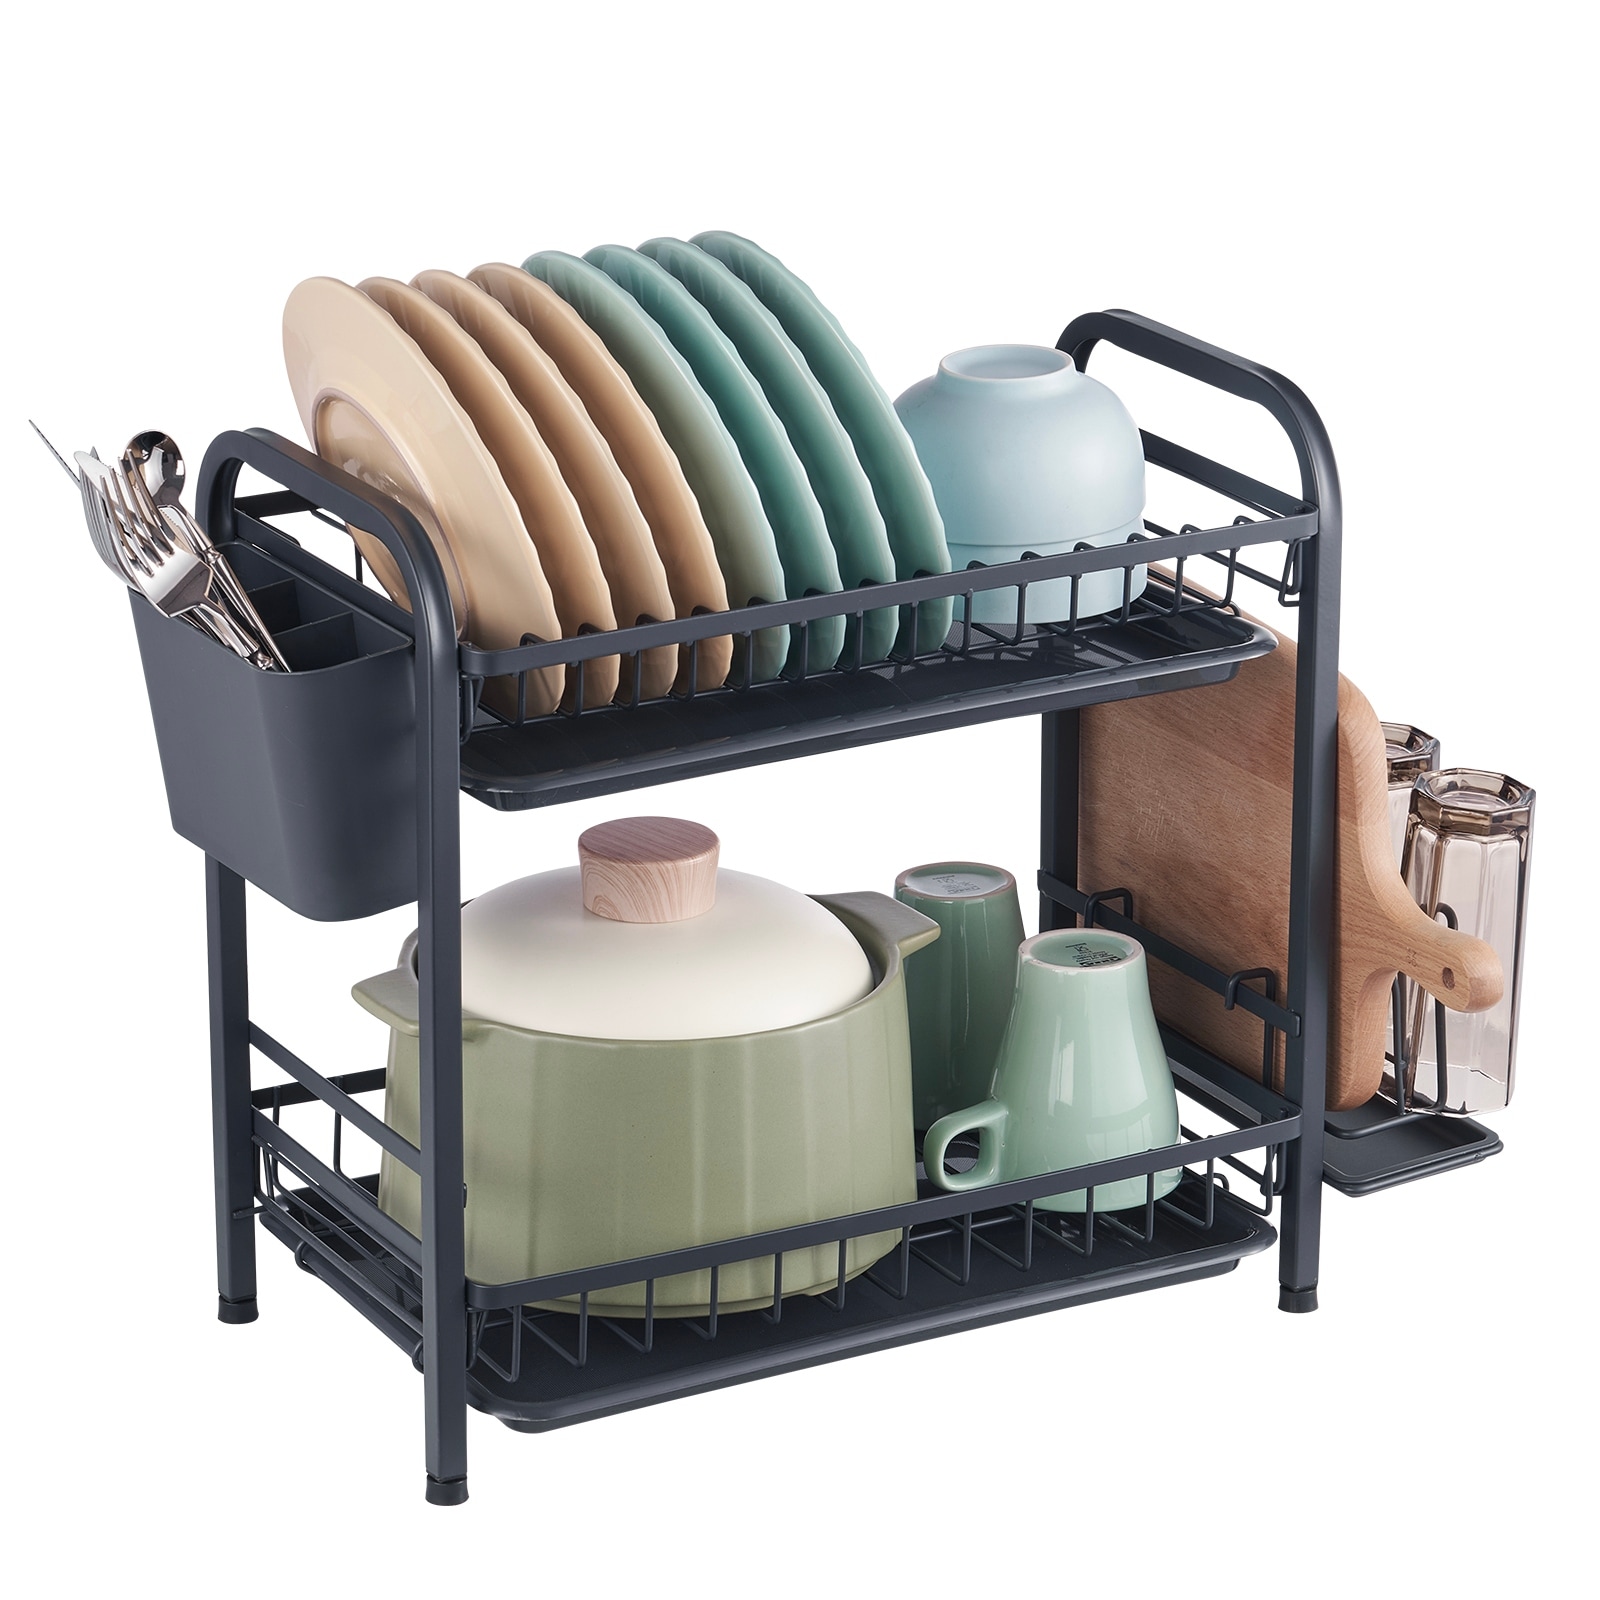 https://ak1.ostkcdn.com/images/products/is/images/direct/cbb3cec803d4055203d25768d4a84377f0345939/VEVOR-2-Tier-Dish-Drying-Rack-Large-Capacity-Drainer-Carbon-Steel-Kitchen-Utensil-Holder.jpg